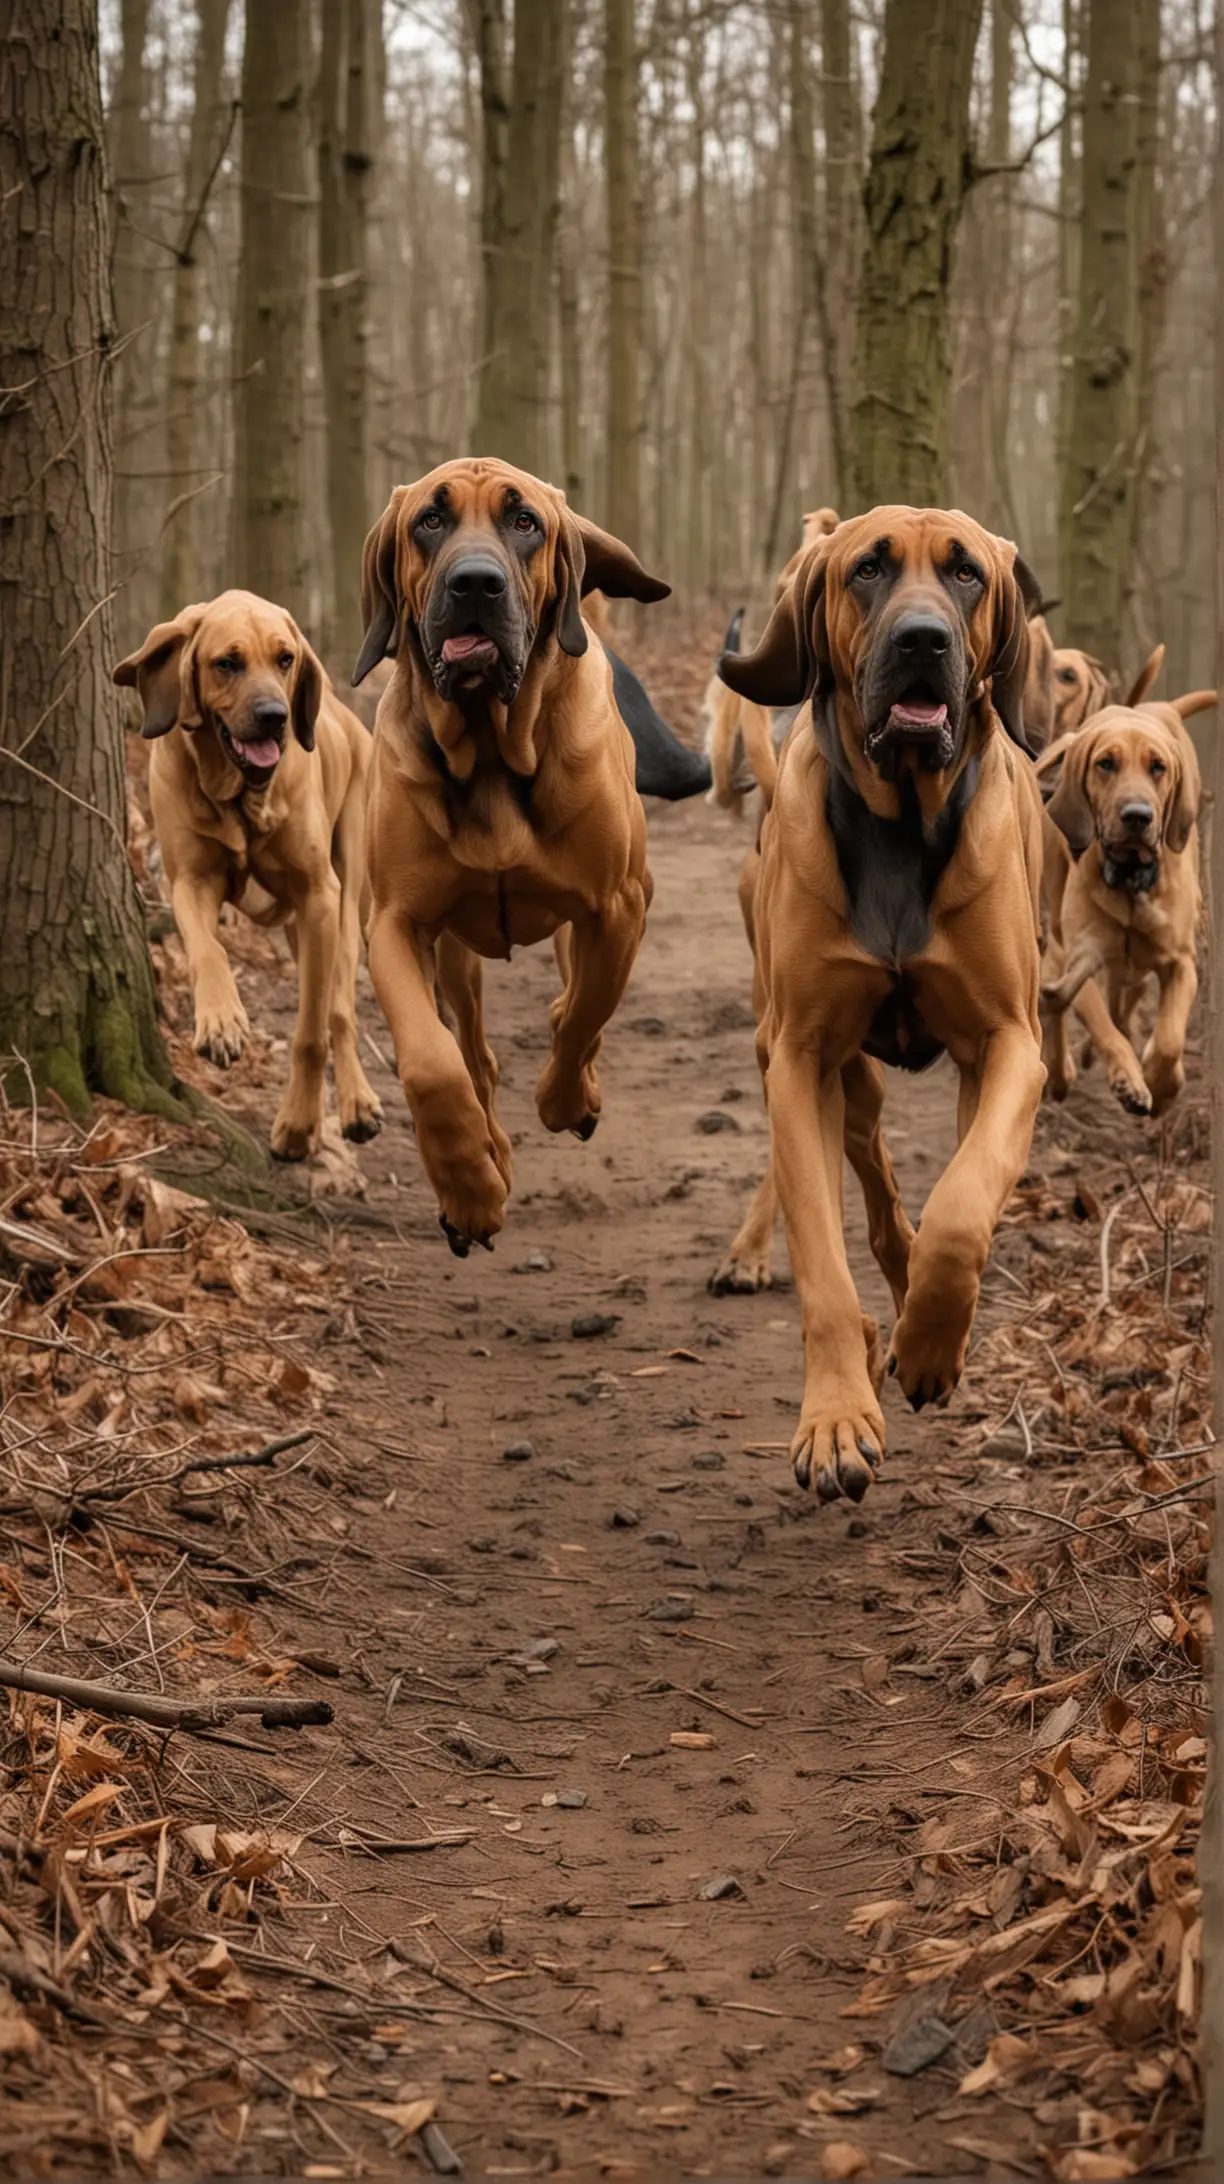 Energetic Bloodhound Dogs Running Through a Serene Woodland Setting